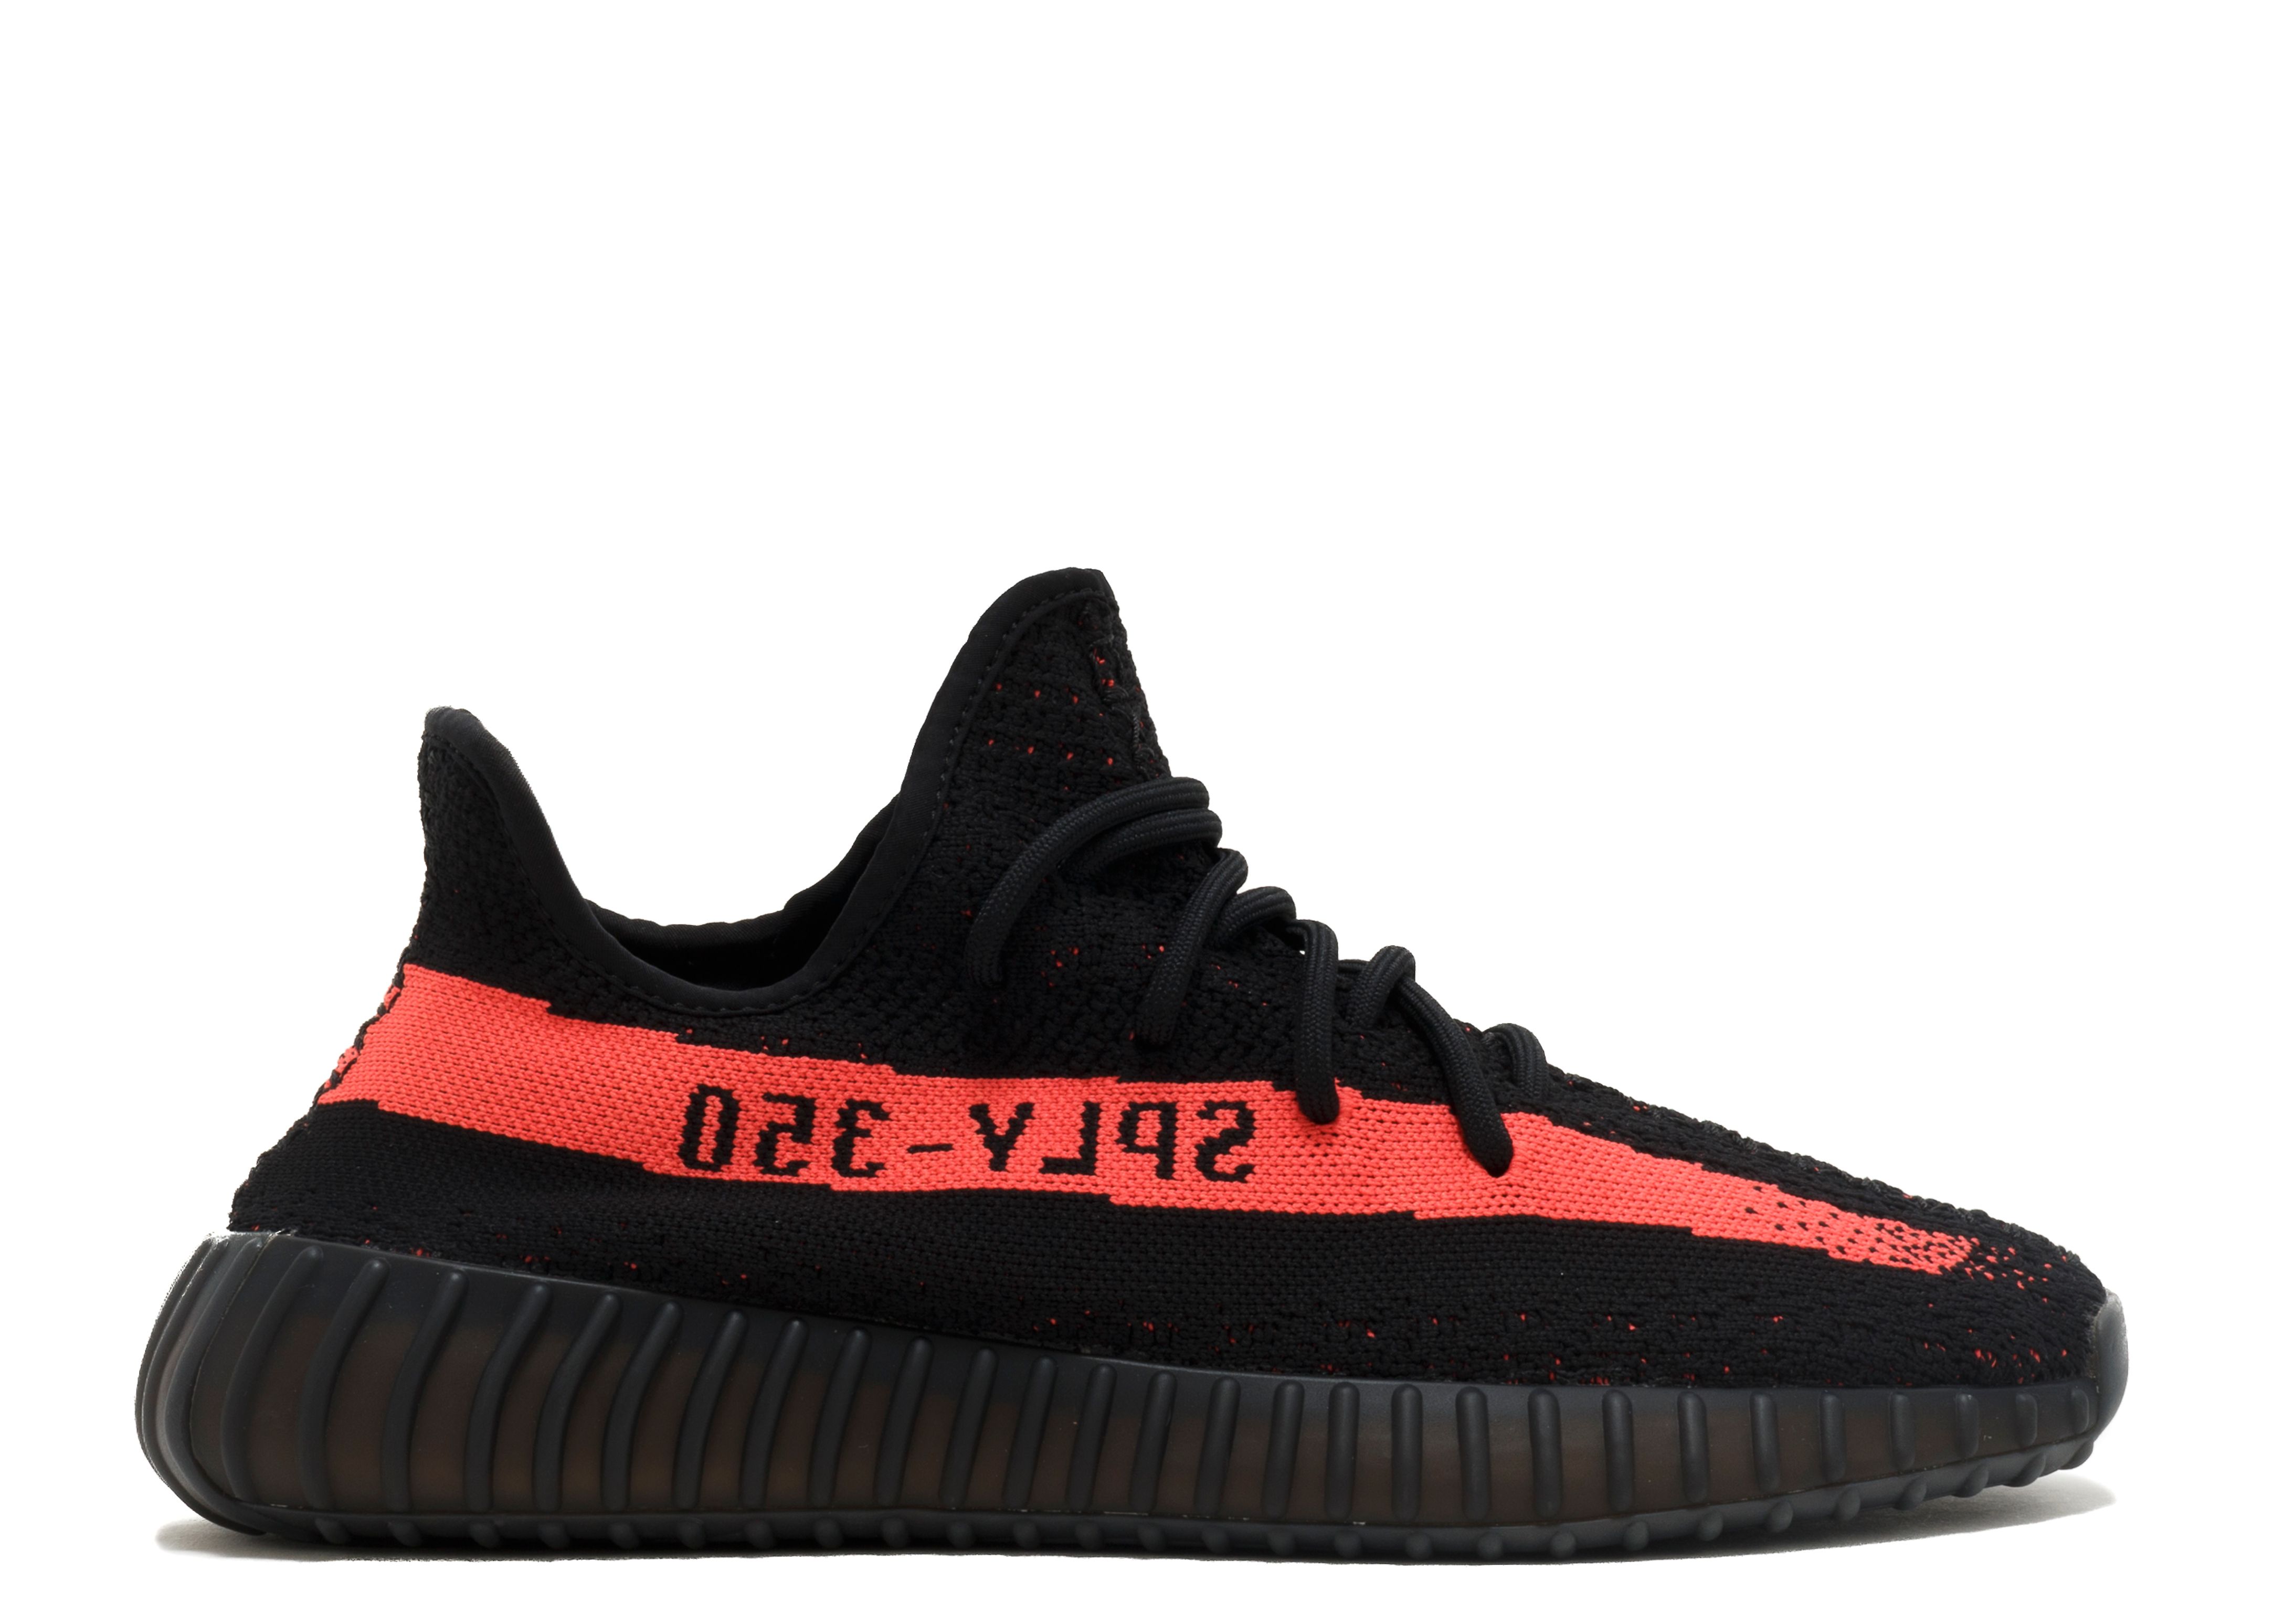 Authorized Yeezy 350 v2 black Release Date 2016